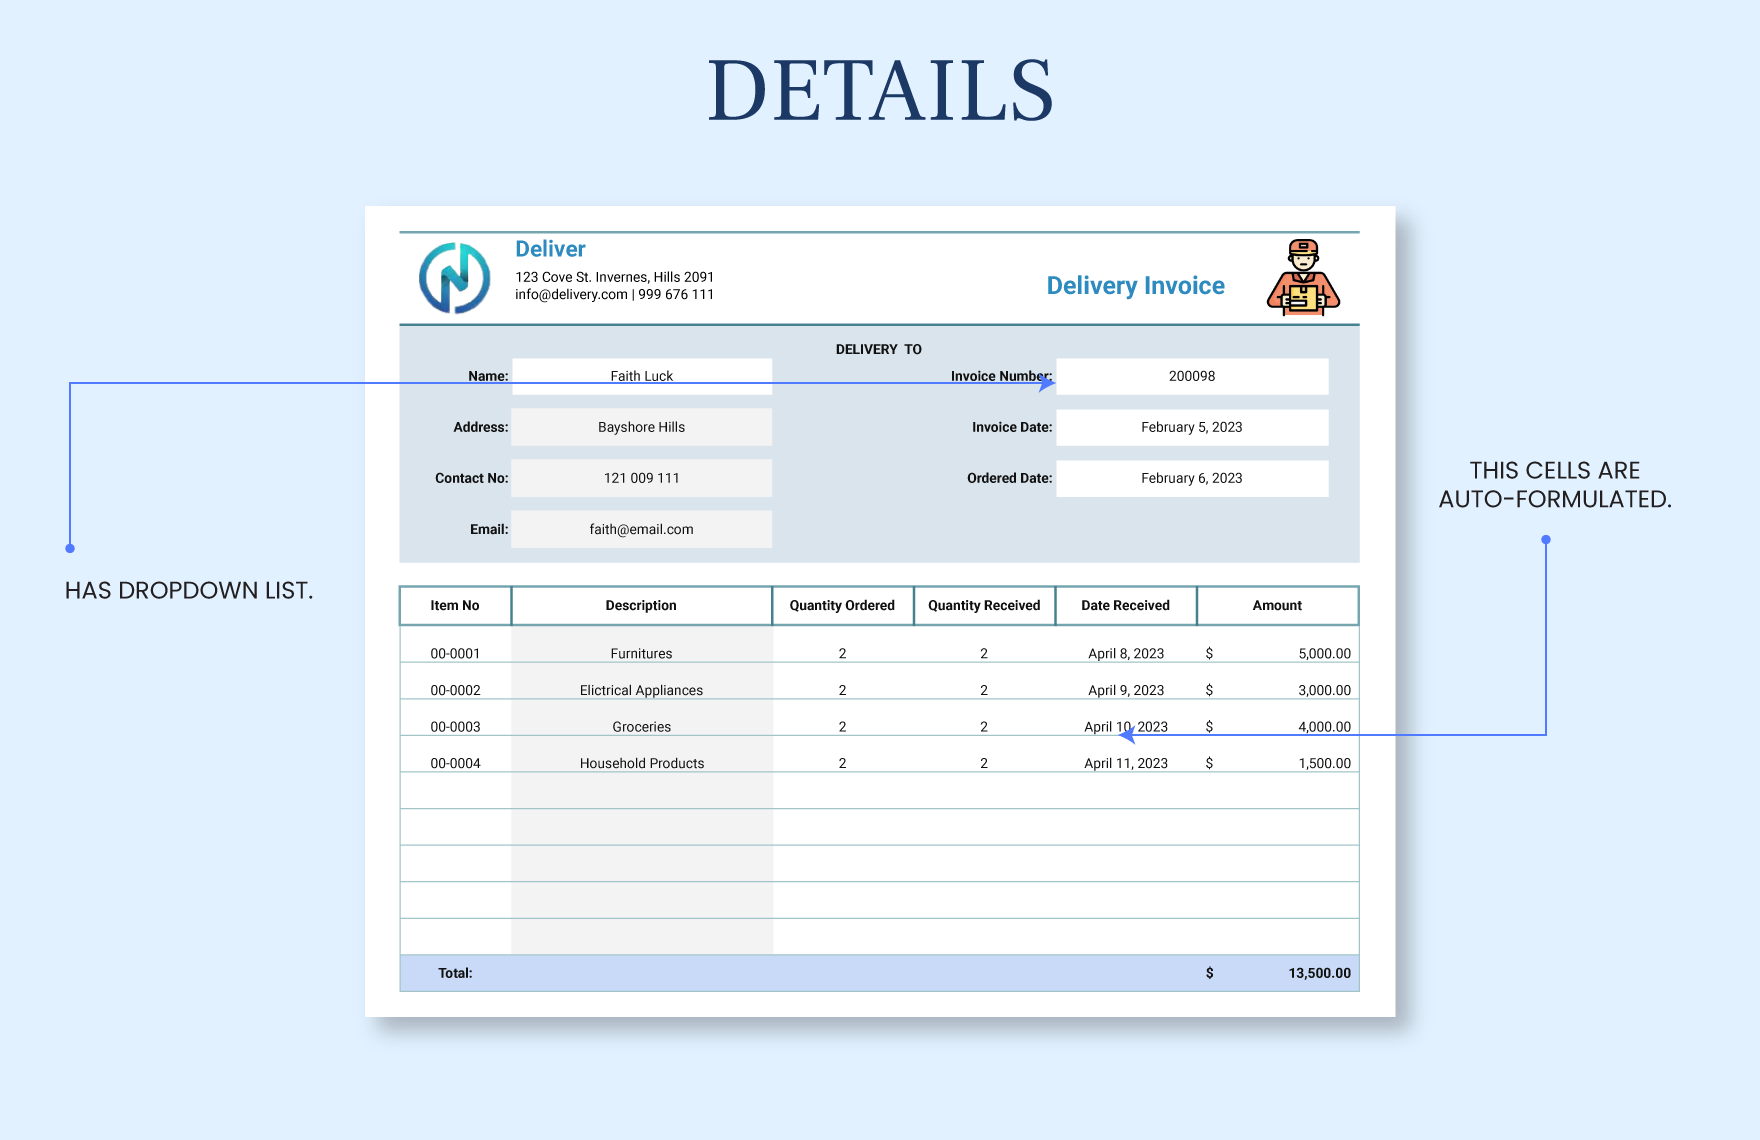 Delivery Invoice Template